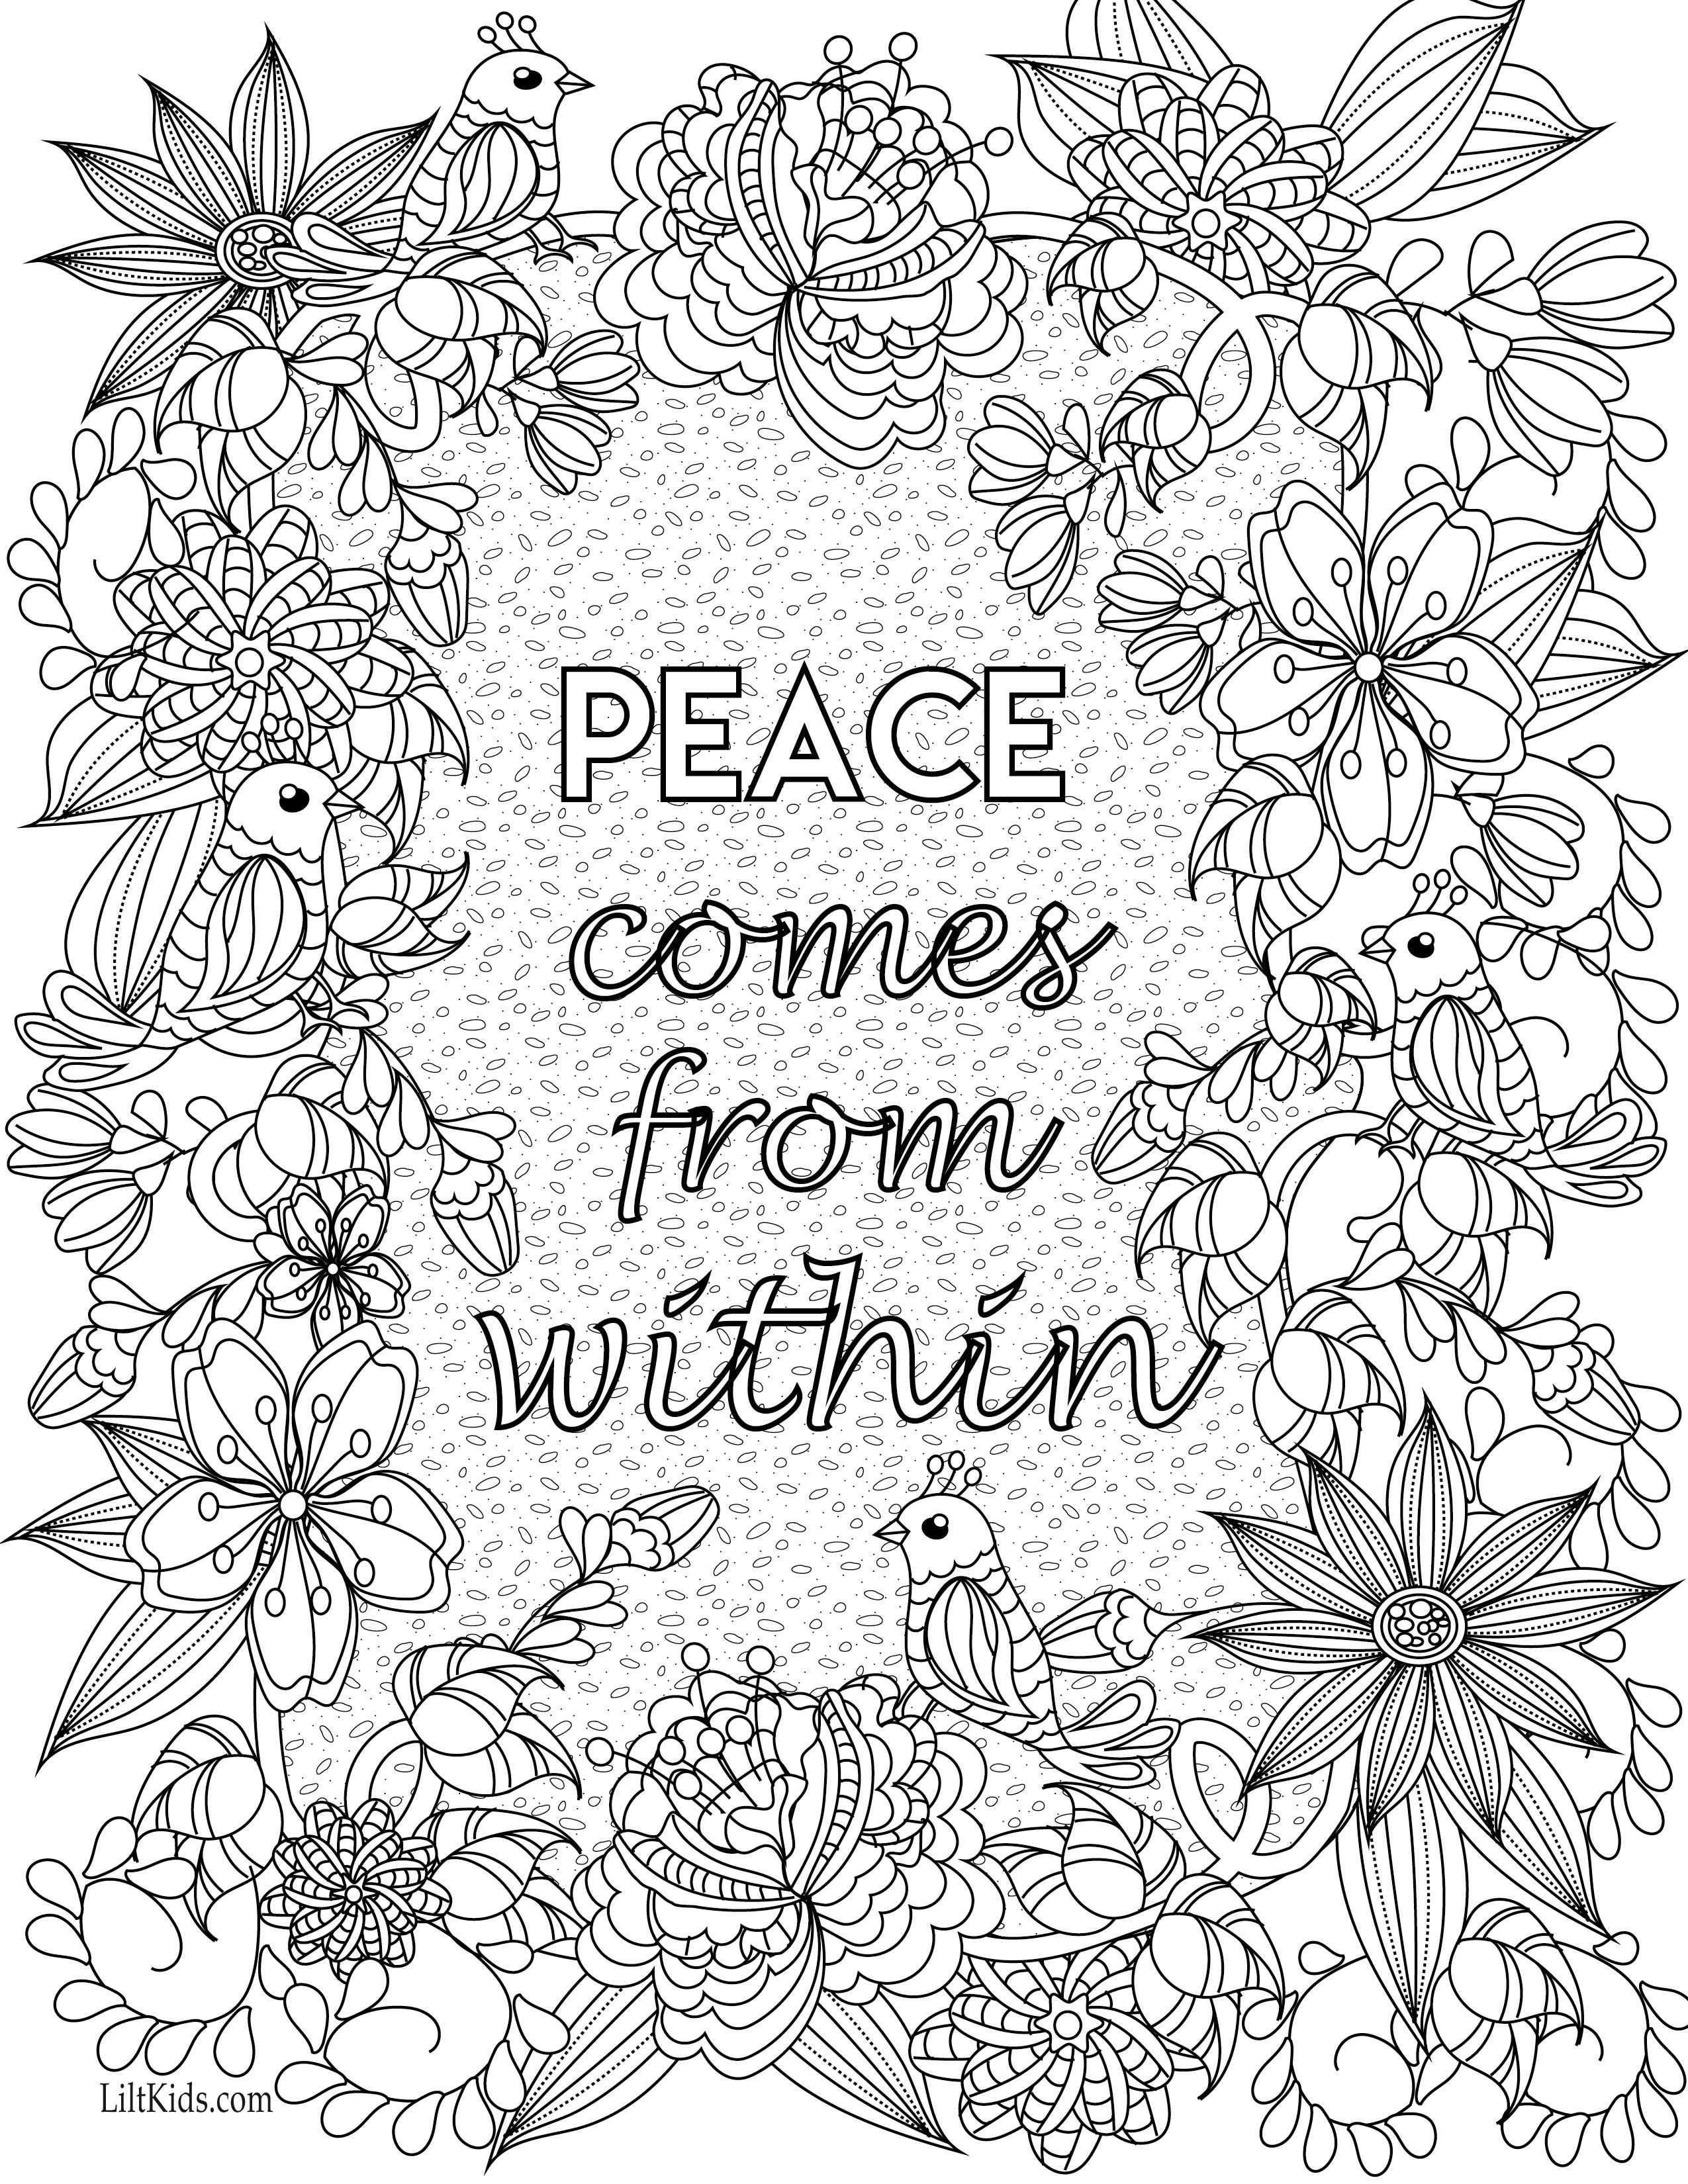 Free Printable Coloring Pages With Quotes Coloring Pages Breathtaking Free Printable Adult Coloring Pages